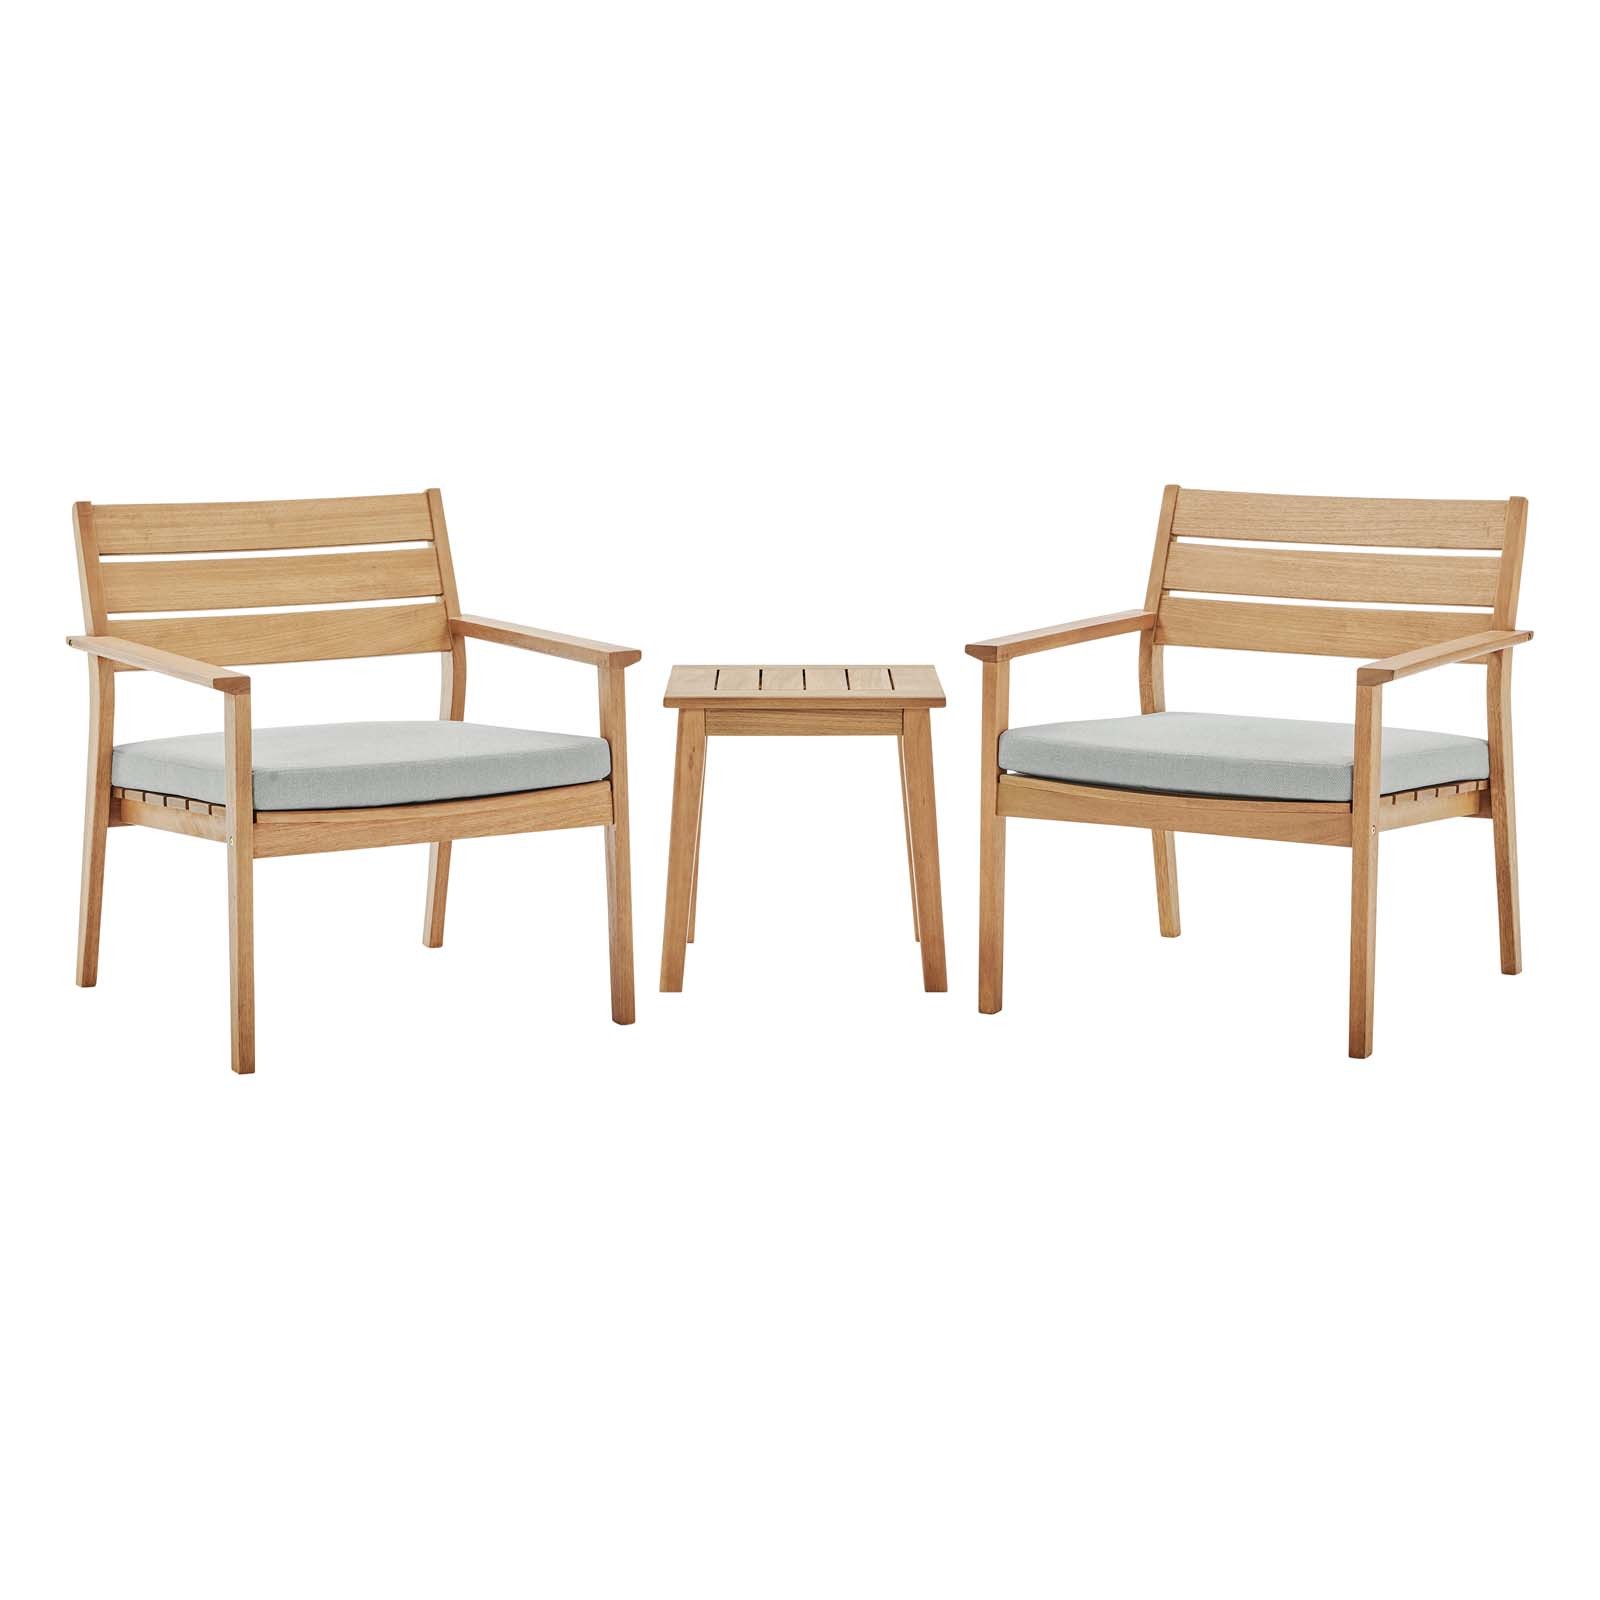 Breton 3 Piece Outdoor Patio Ash Wood Set in Natural Taupe